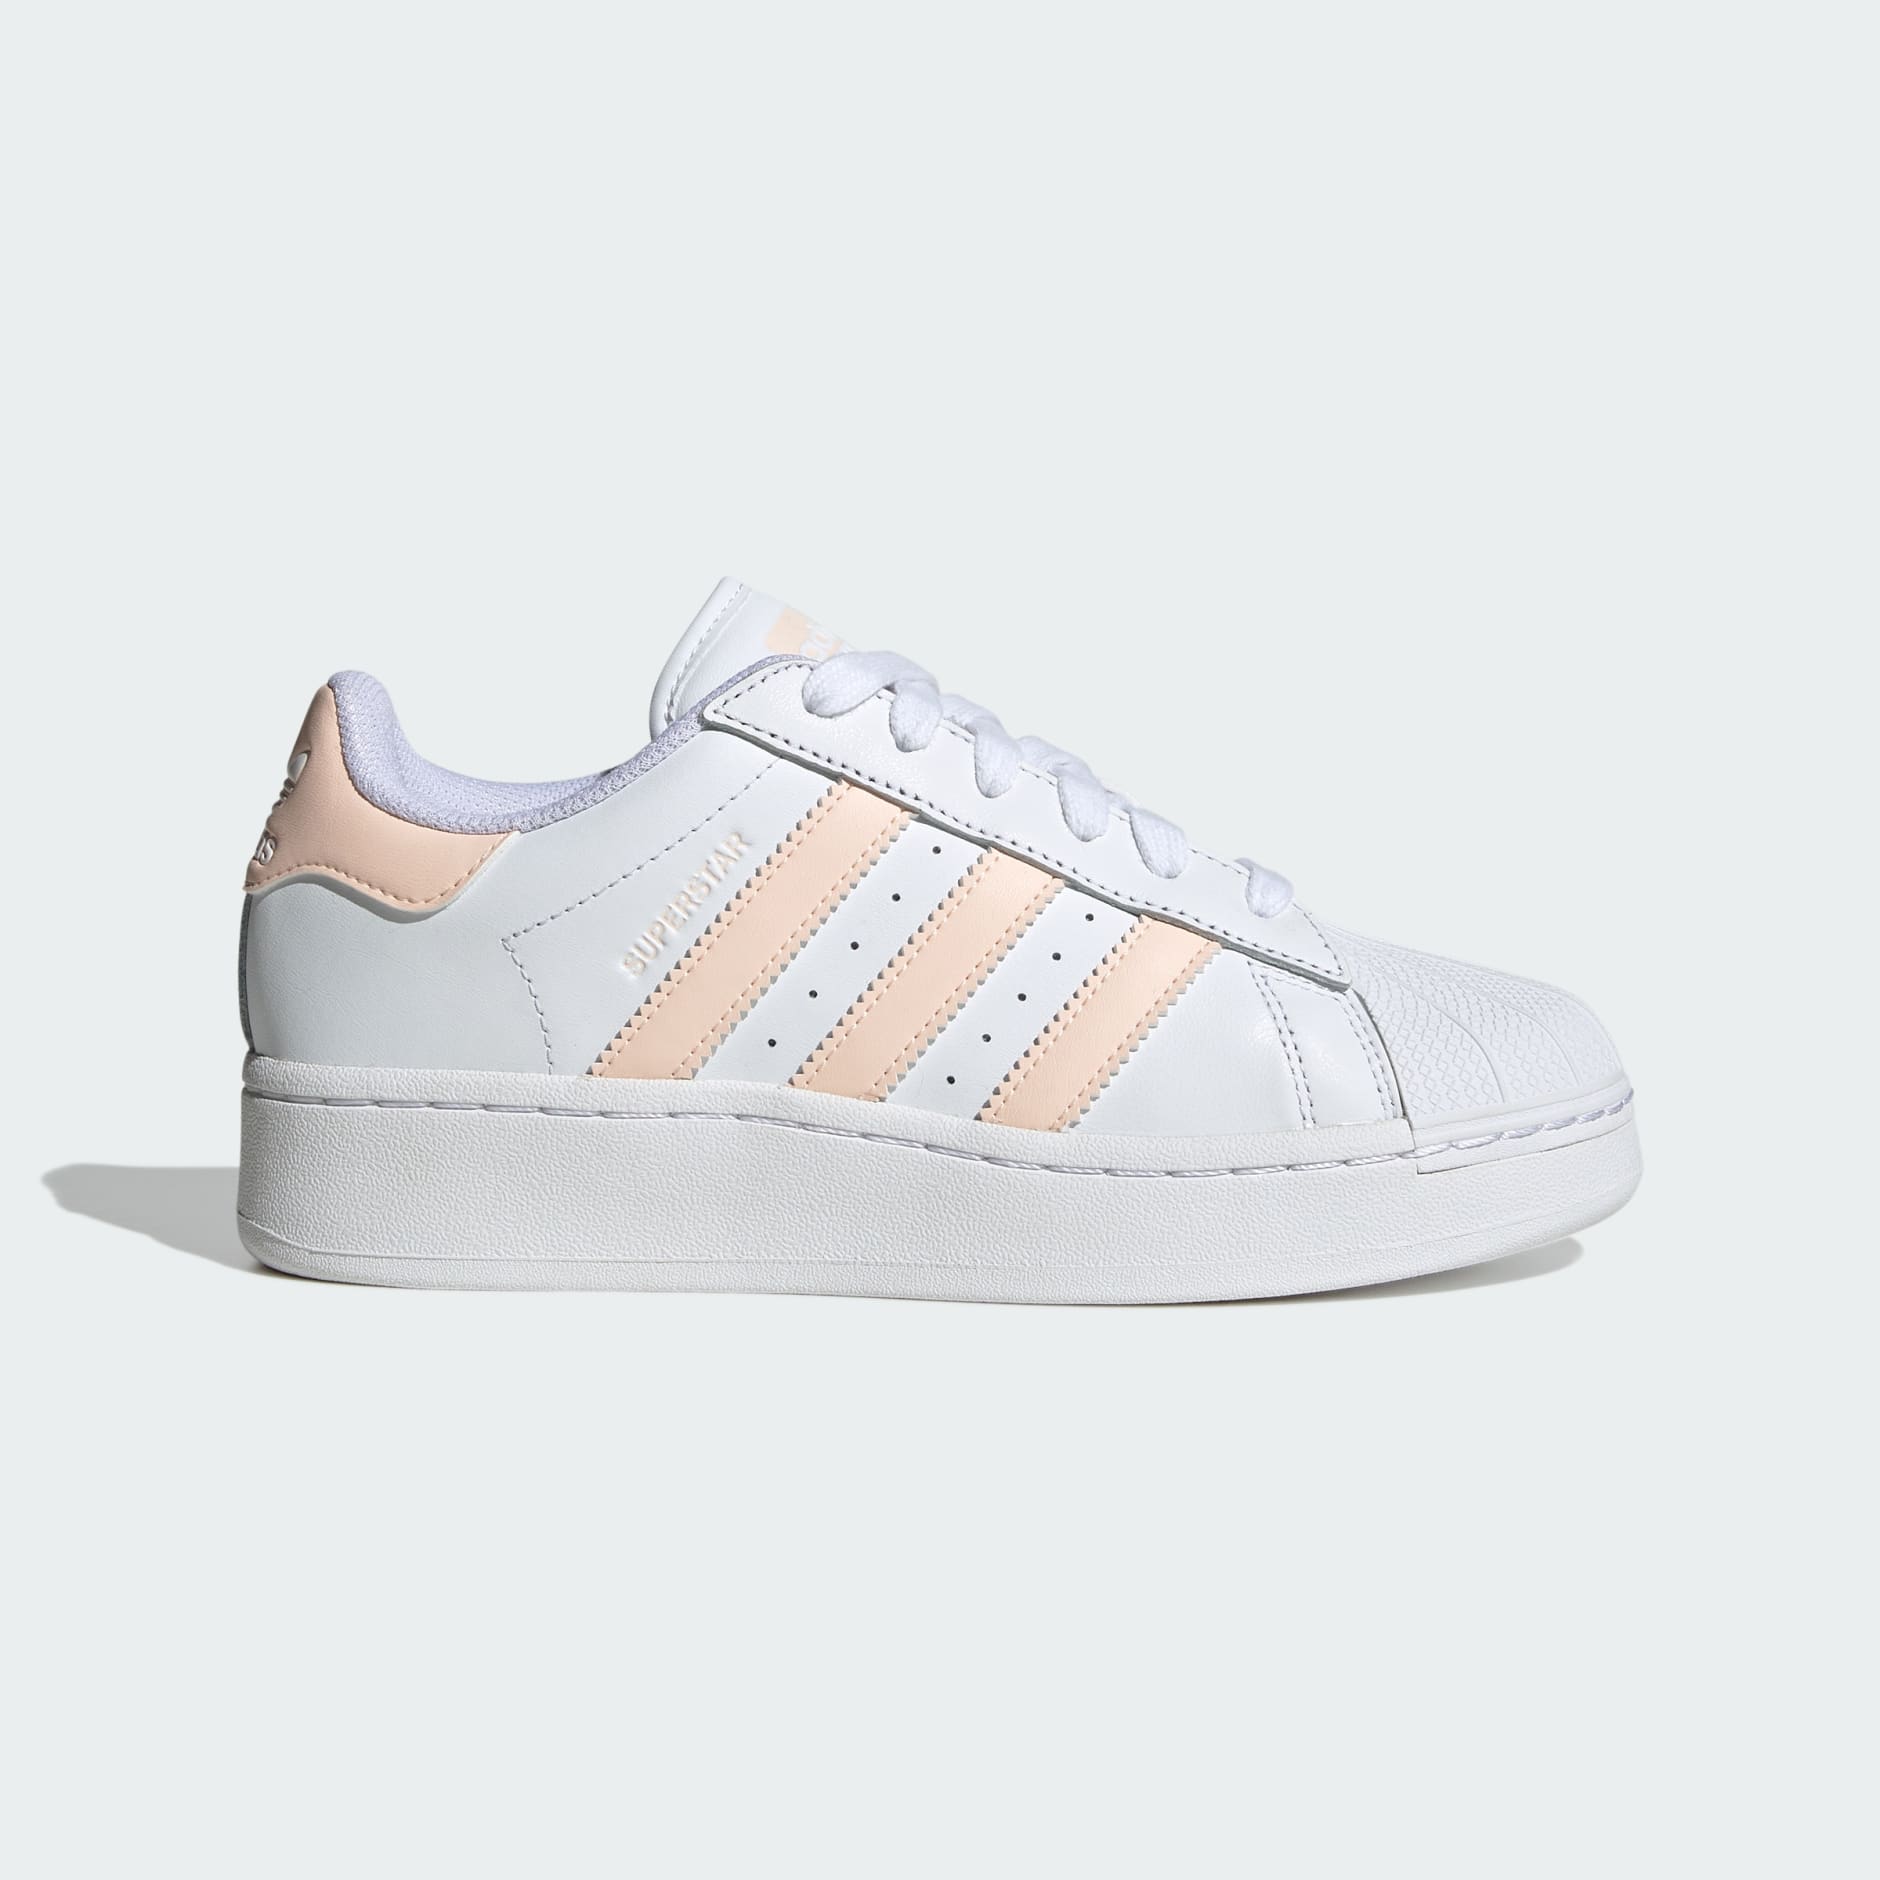 adidas Superstar XLG Shoes - White | adidas GH